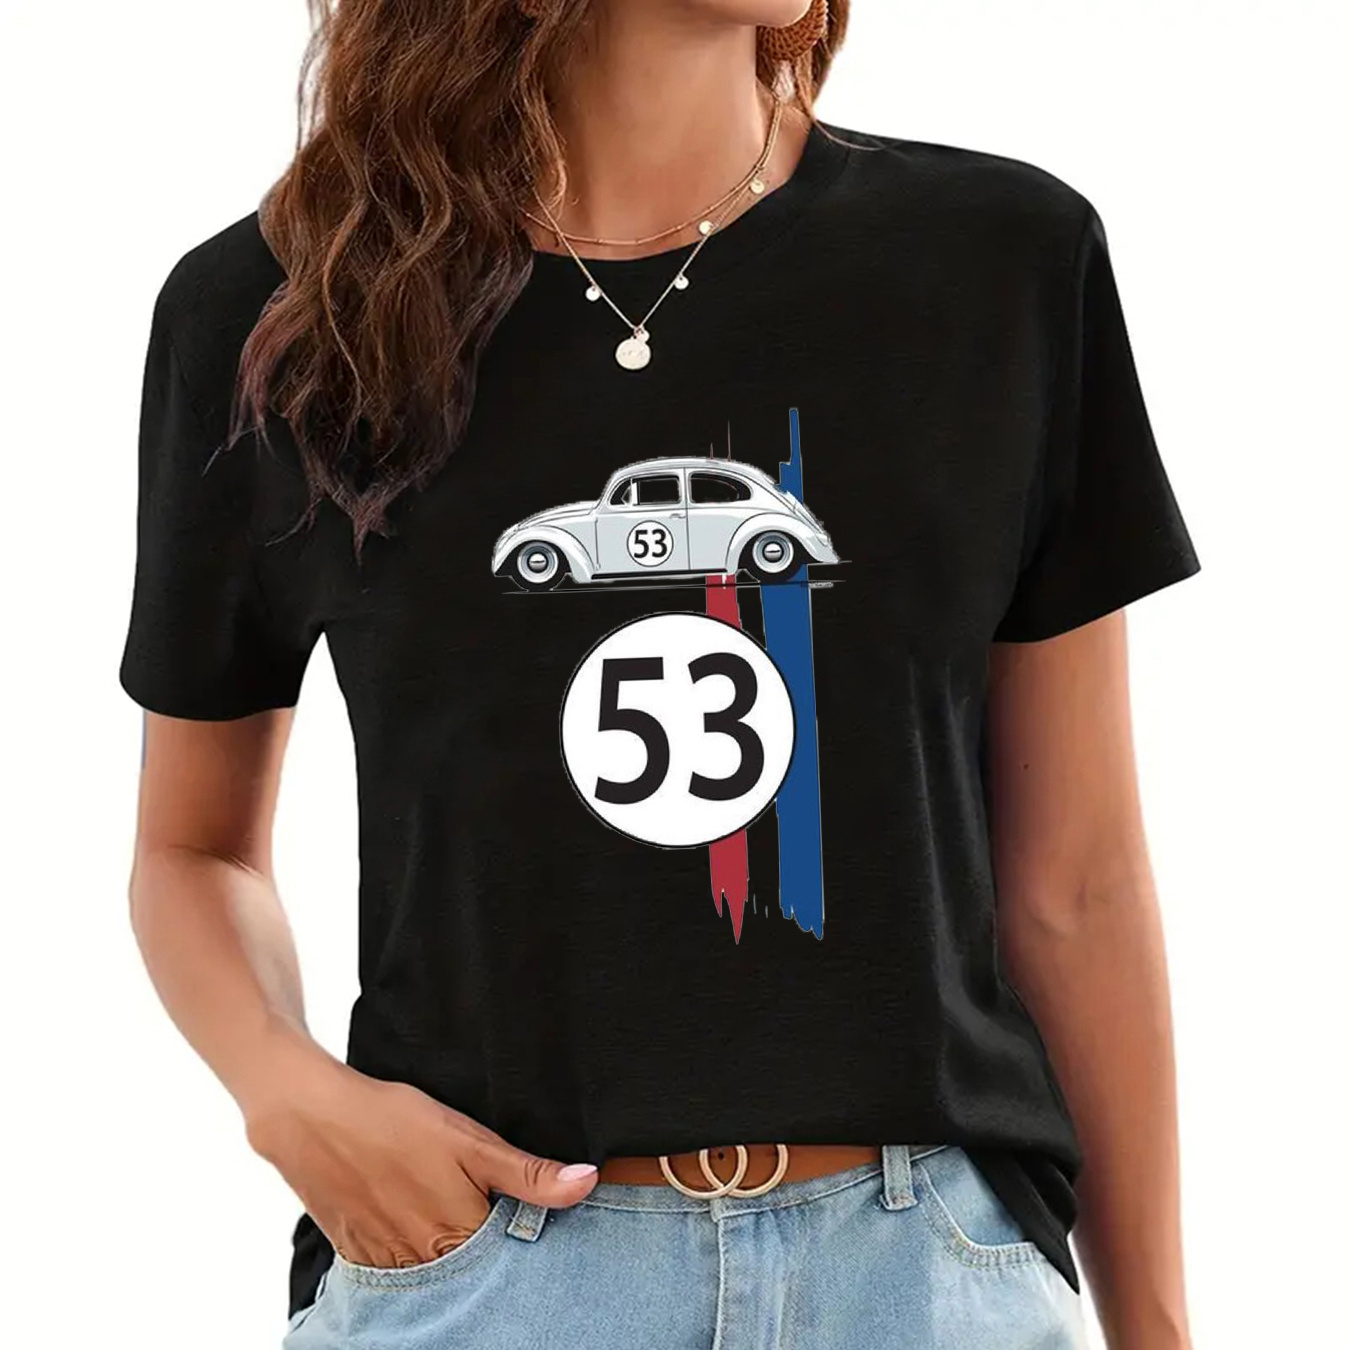 

Number 53 Car Print Crew Neck T-shirt, Casual Short Sleeve T-shirt For Spring & Summer, Women's Clothing